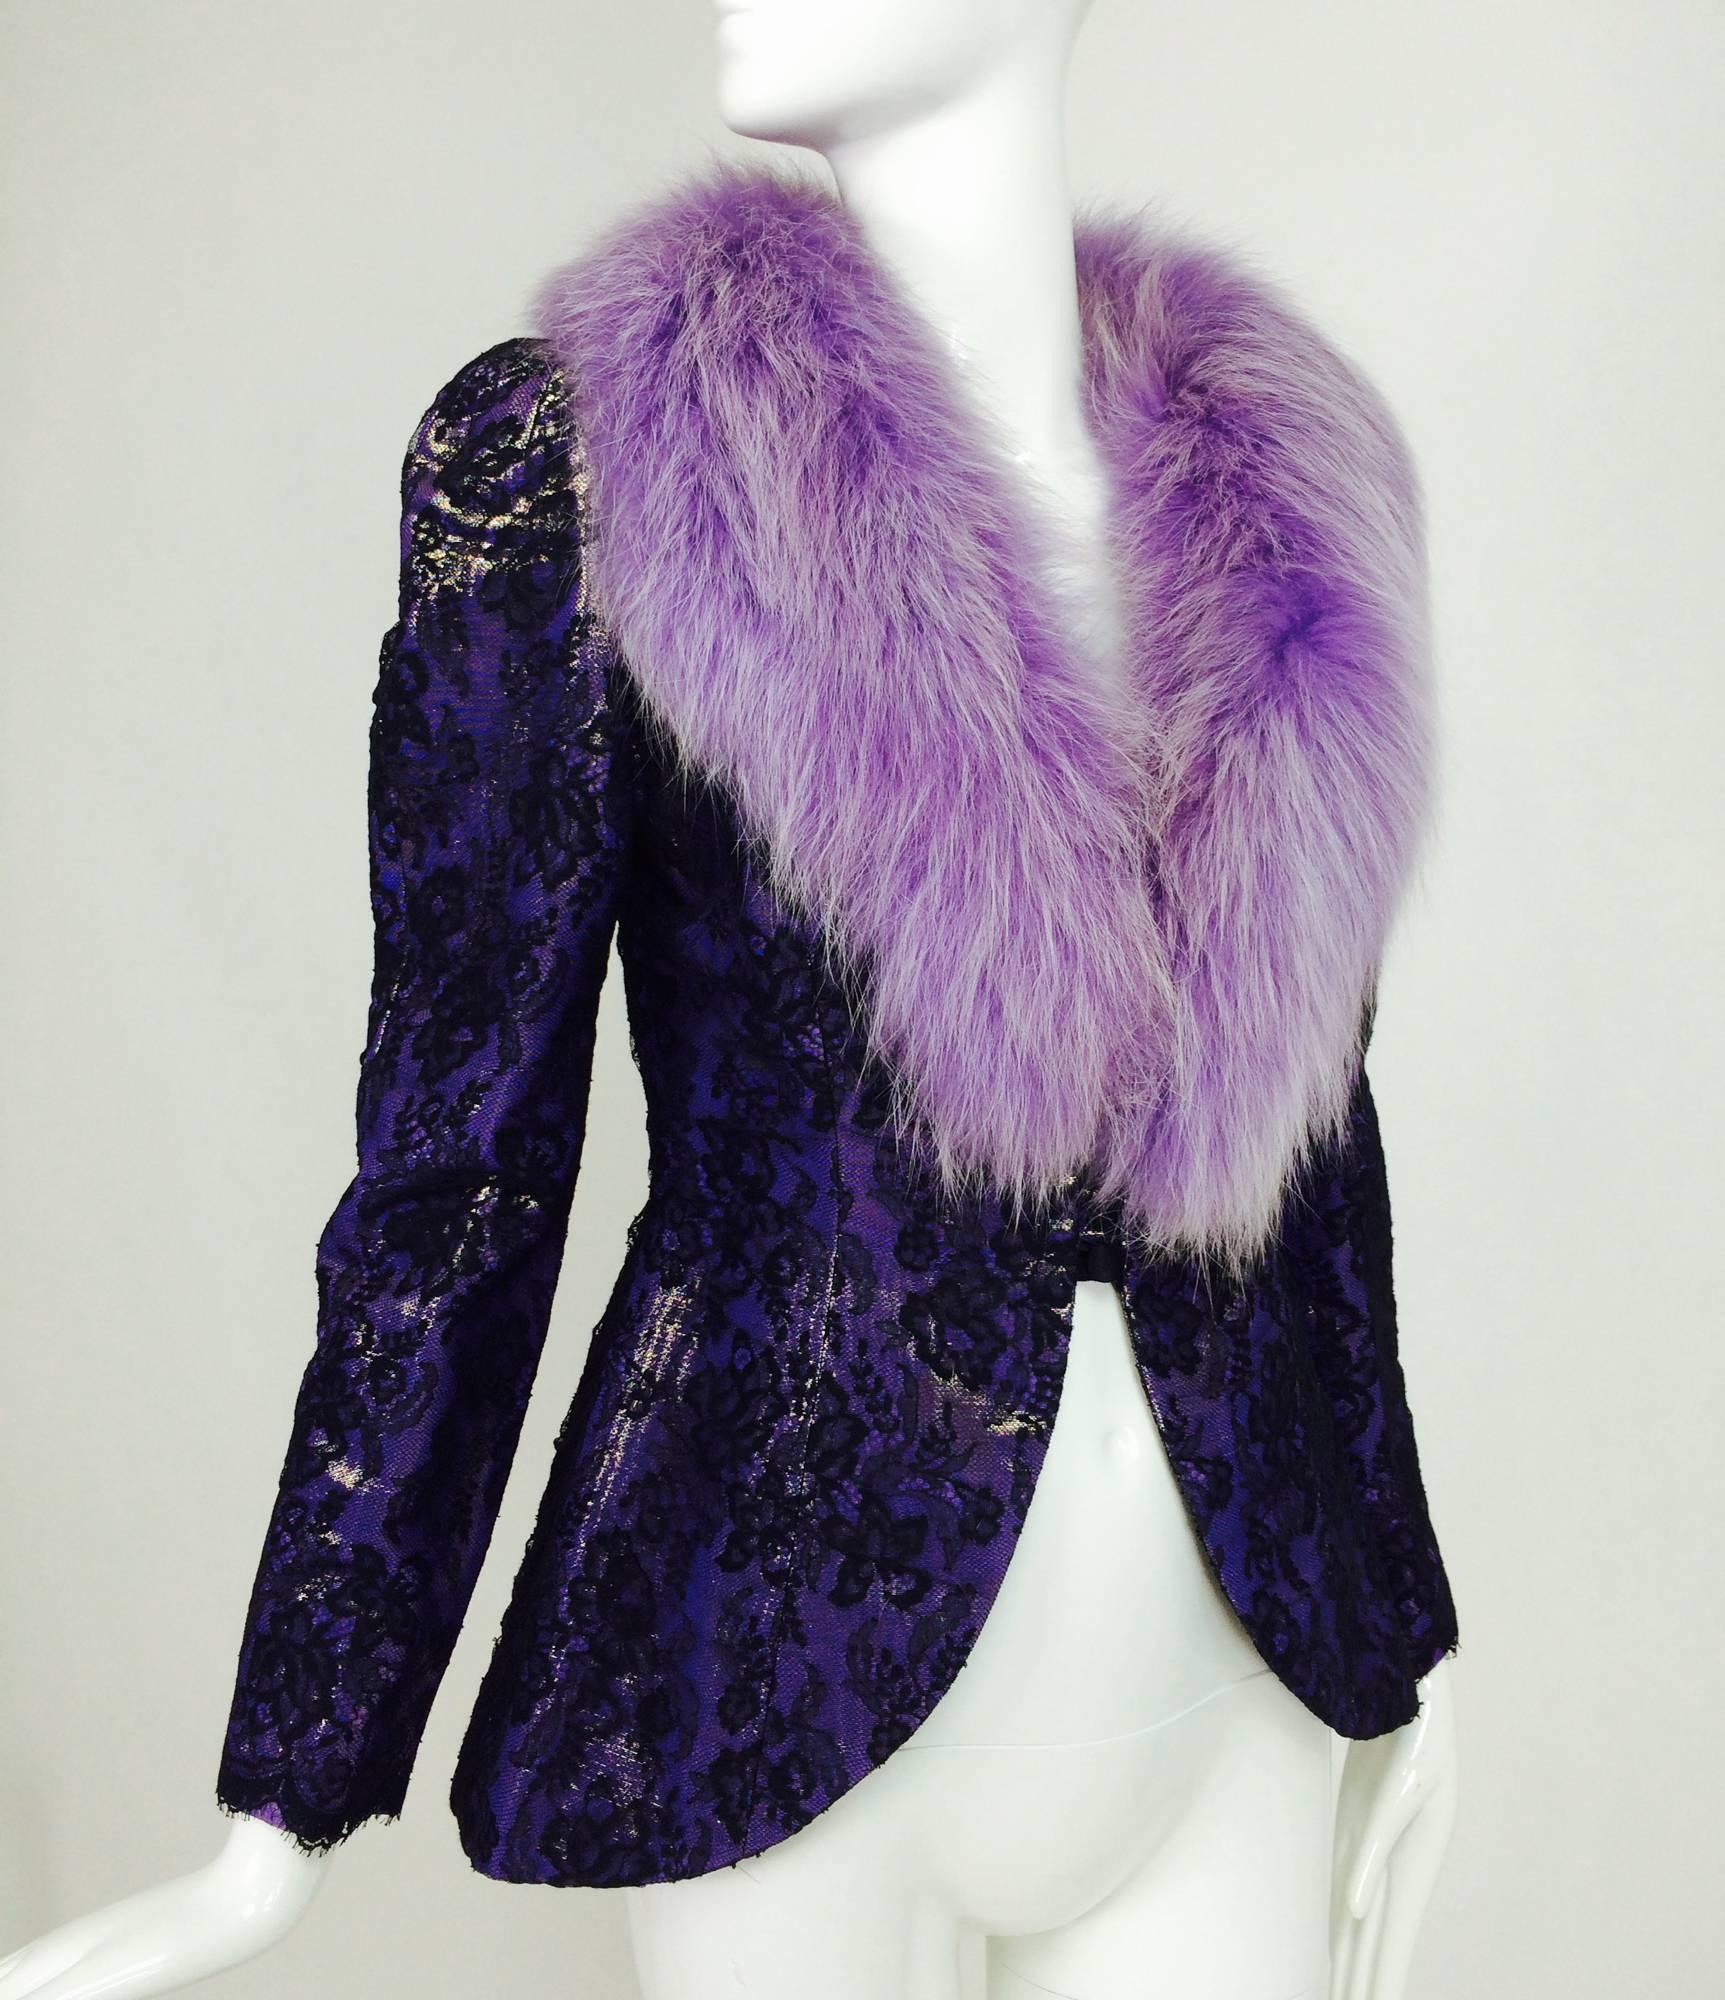 Vintage Adolfo purple metallic lame with black lace jacket with fur collar 1980s. The jacket is purple metallic lame with an overlay of black lace, the princess seamed jacket is fitted through the waist and skims the hips, cuts away at the hem